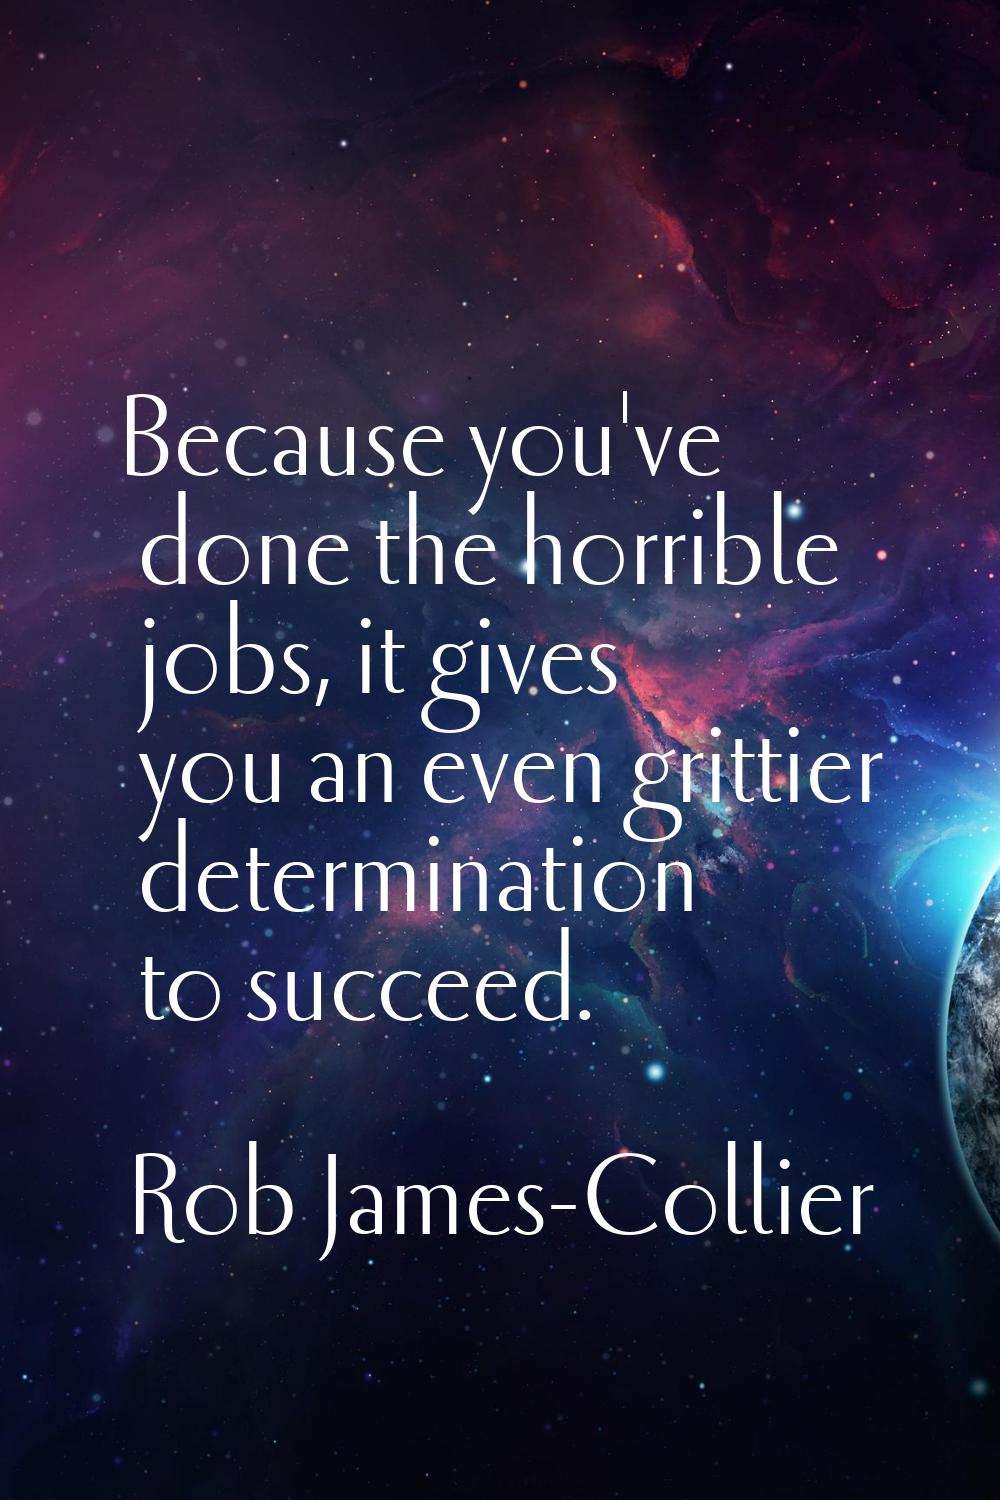 Because you've done the horrible jobs, it gives you an even grittier determination to succeed.